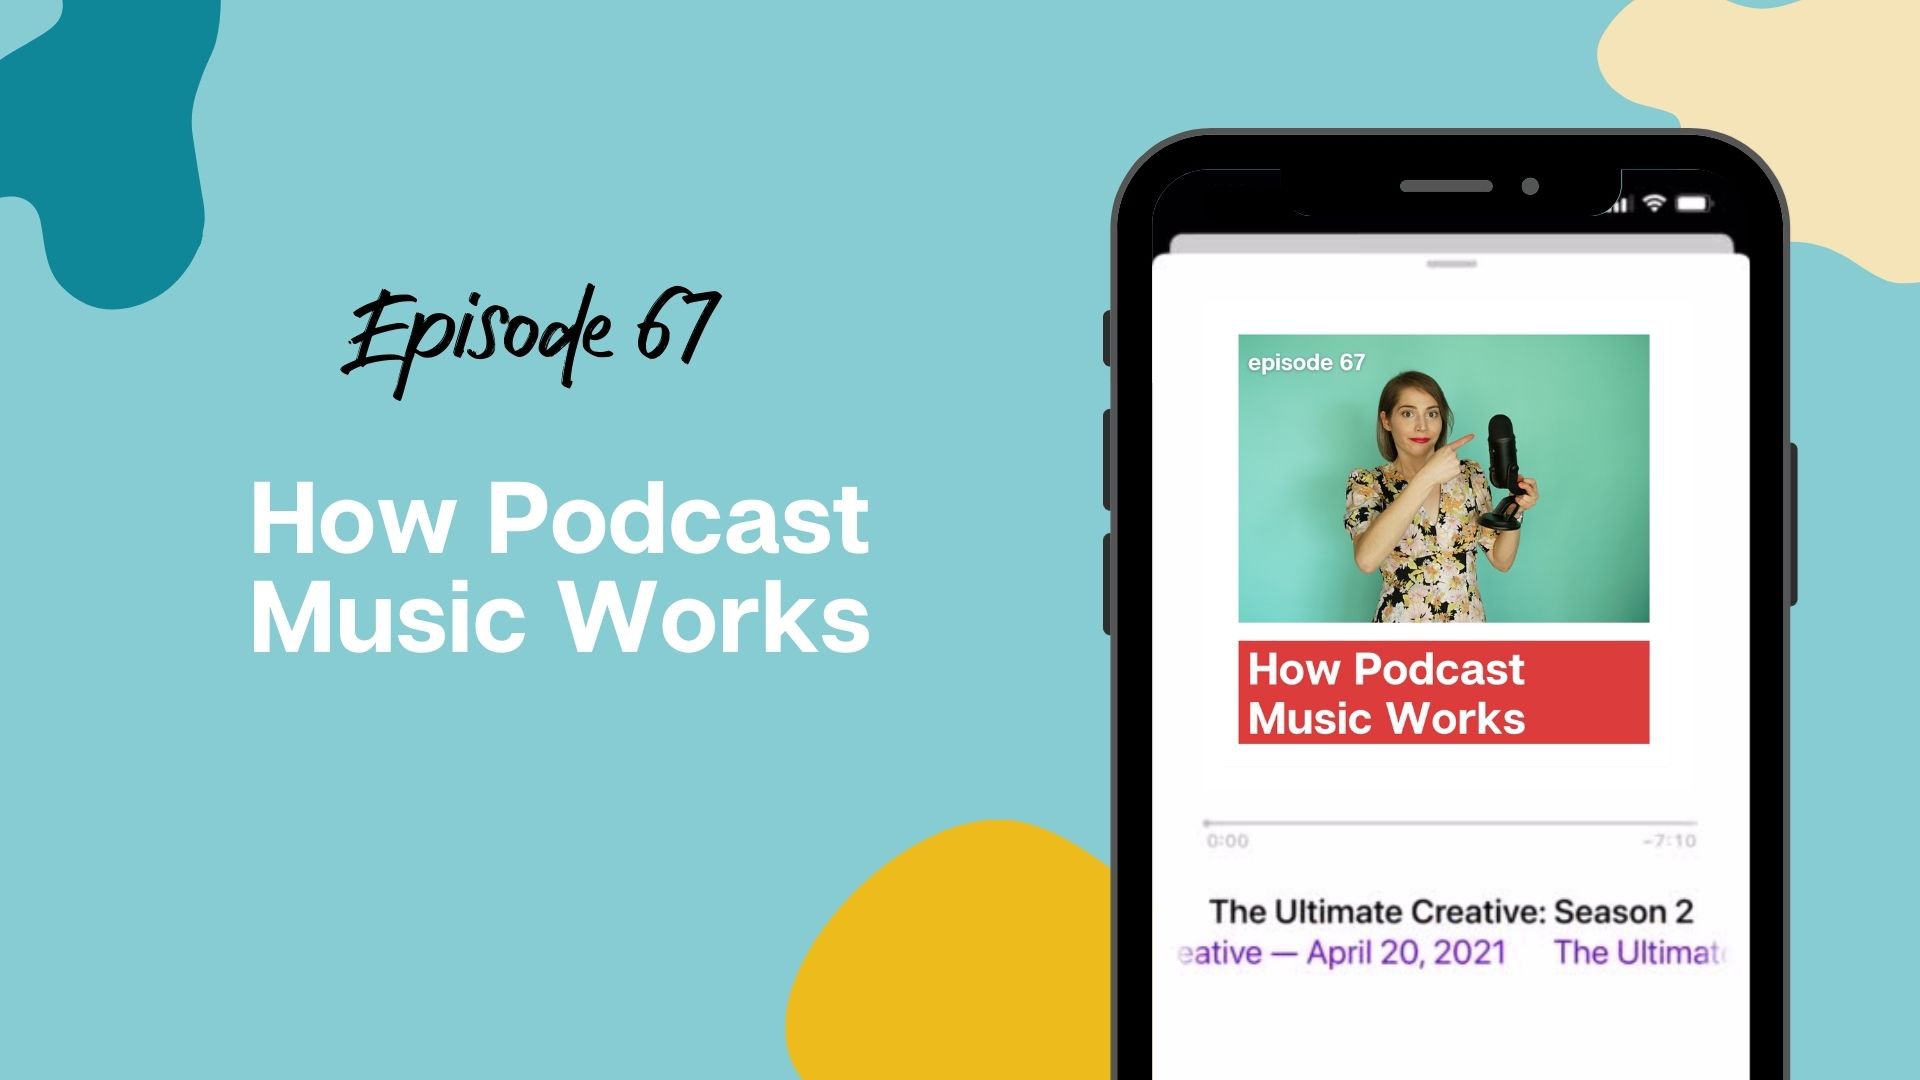 How Podcast Music Works - Featured Image with text that reads "How Podcast Music Works Episode 67" Picture of Emily Milling in podcast artwork mocked up in an iphone